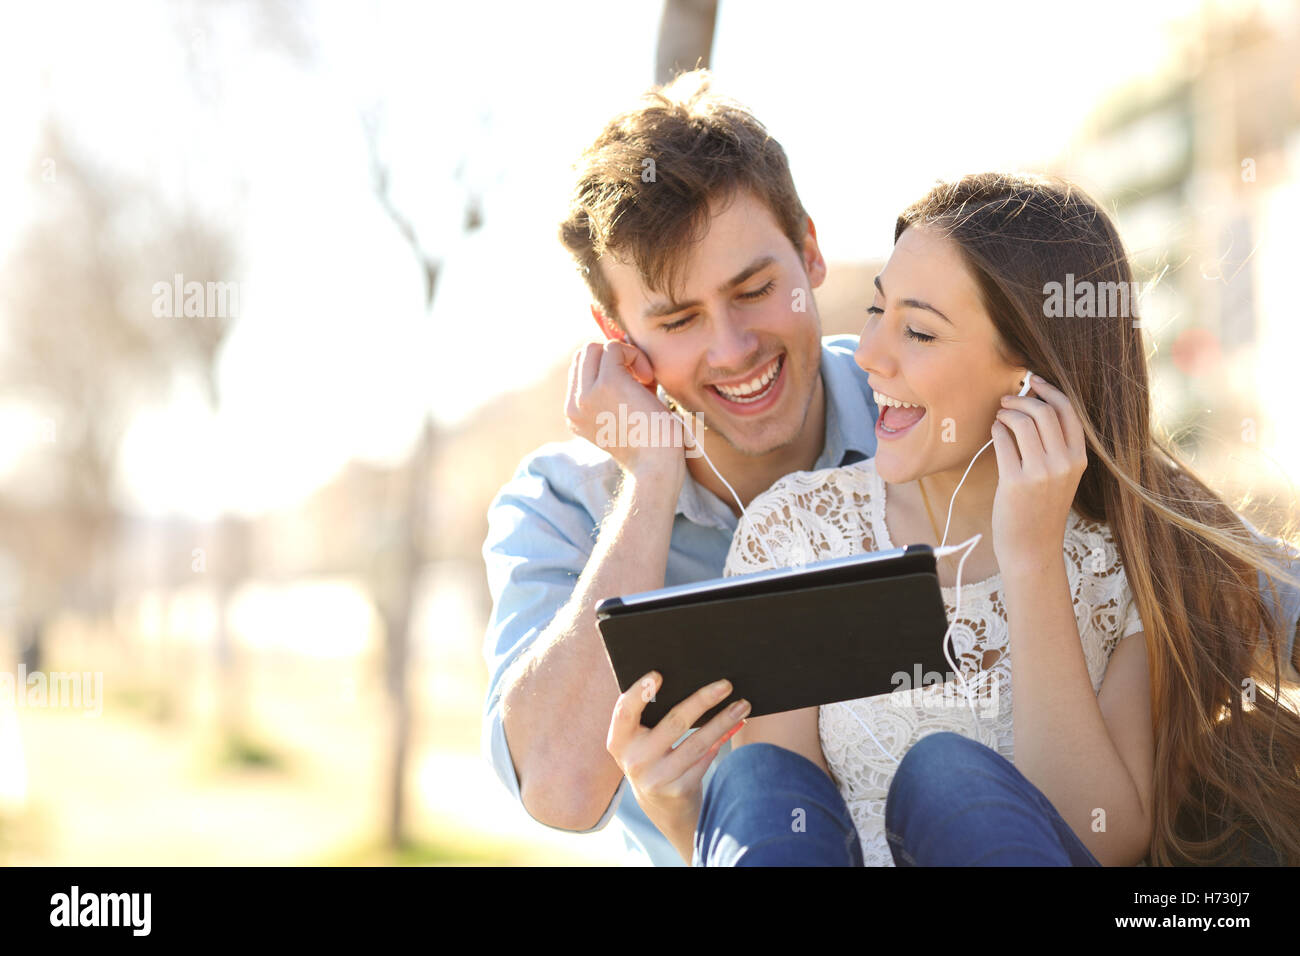 Couple sharing music and singing with a tablet Stock Photo